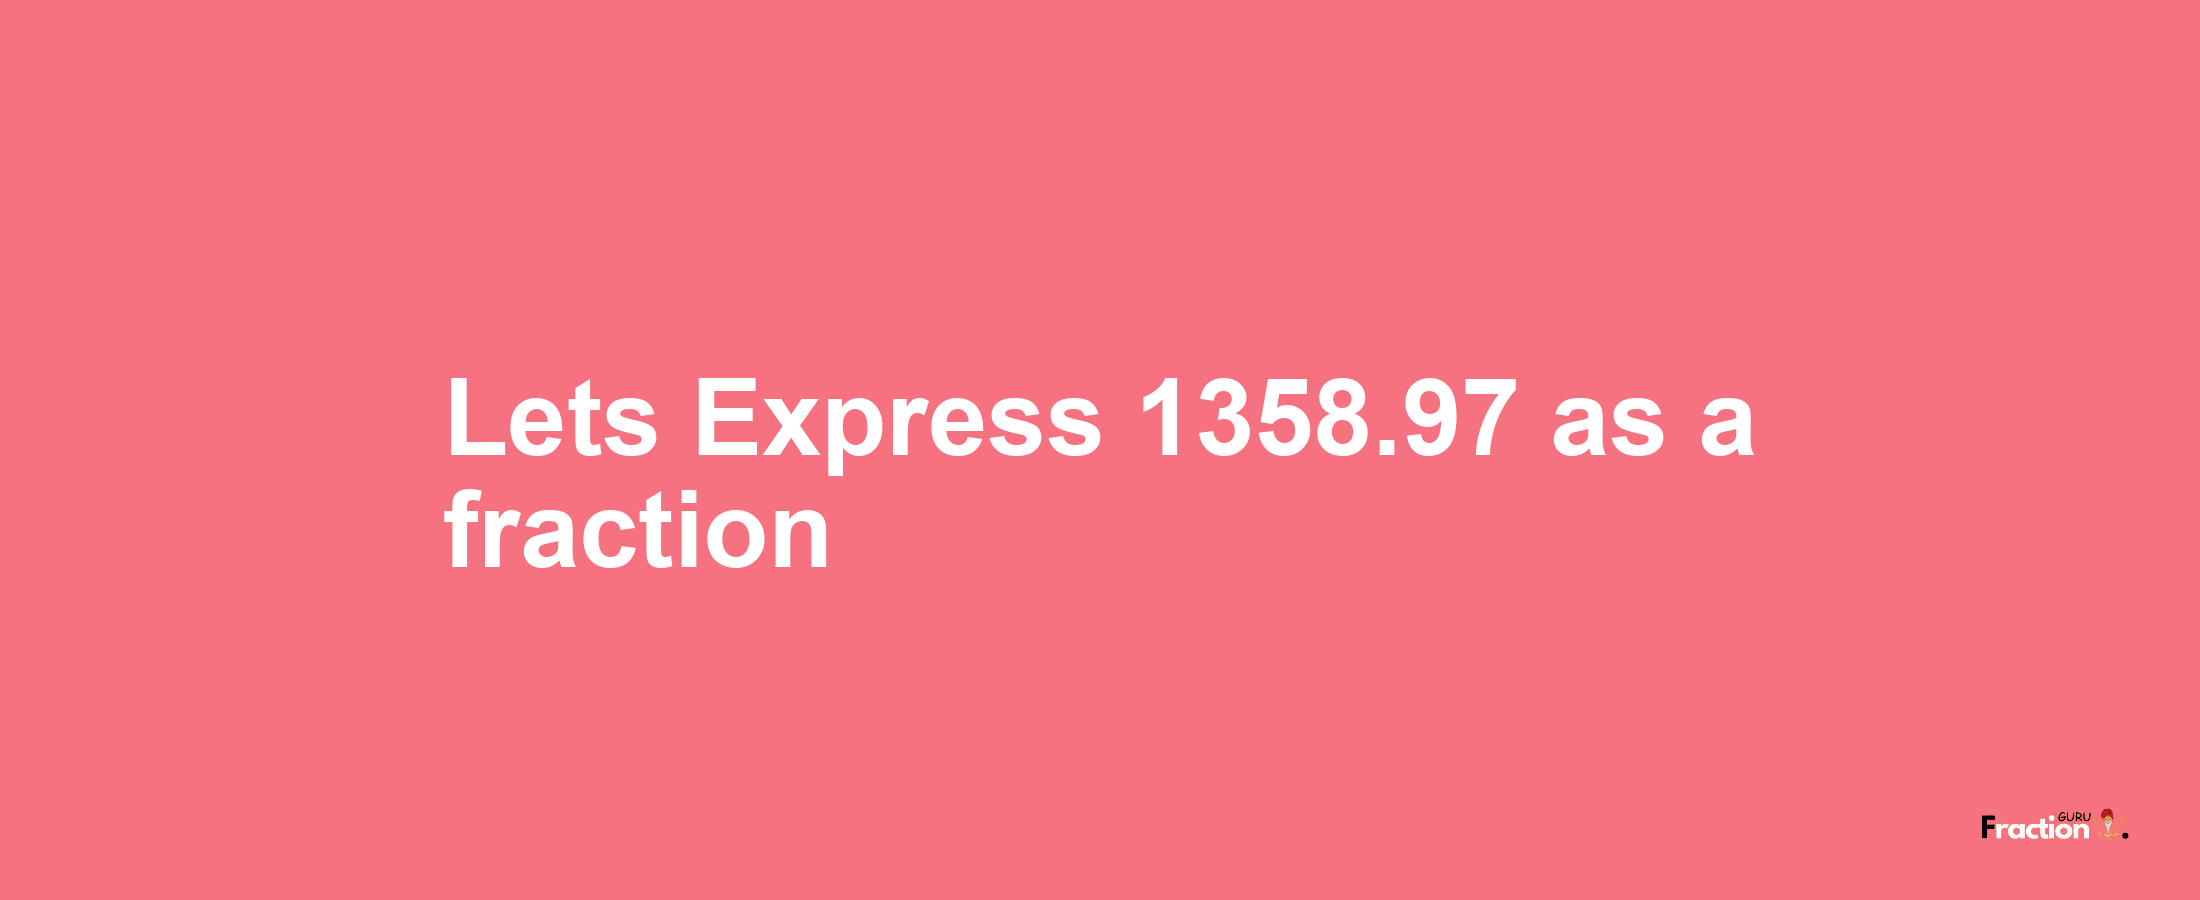 Lets Express 1358.97 as afraction